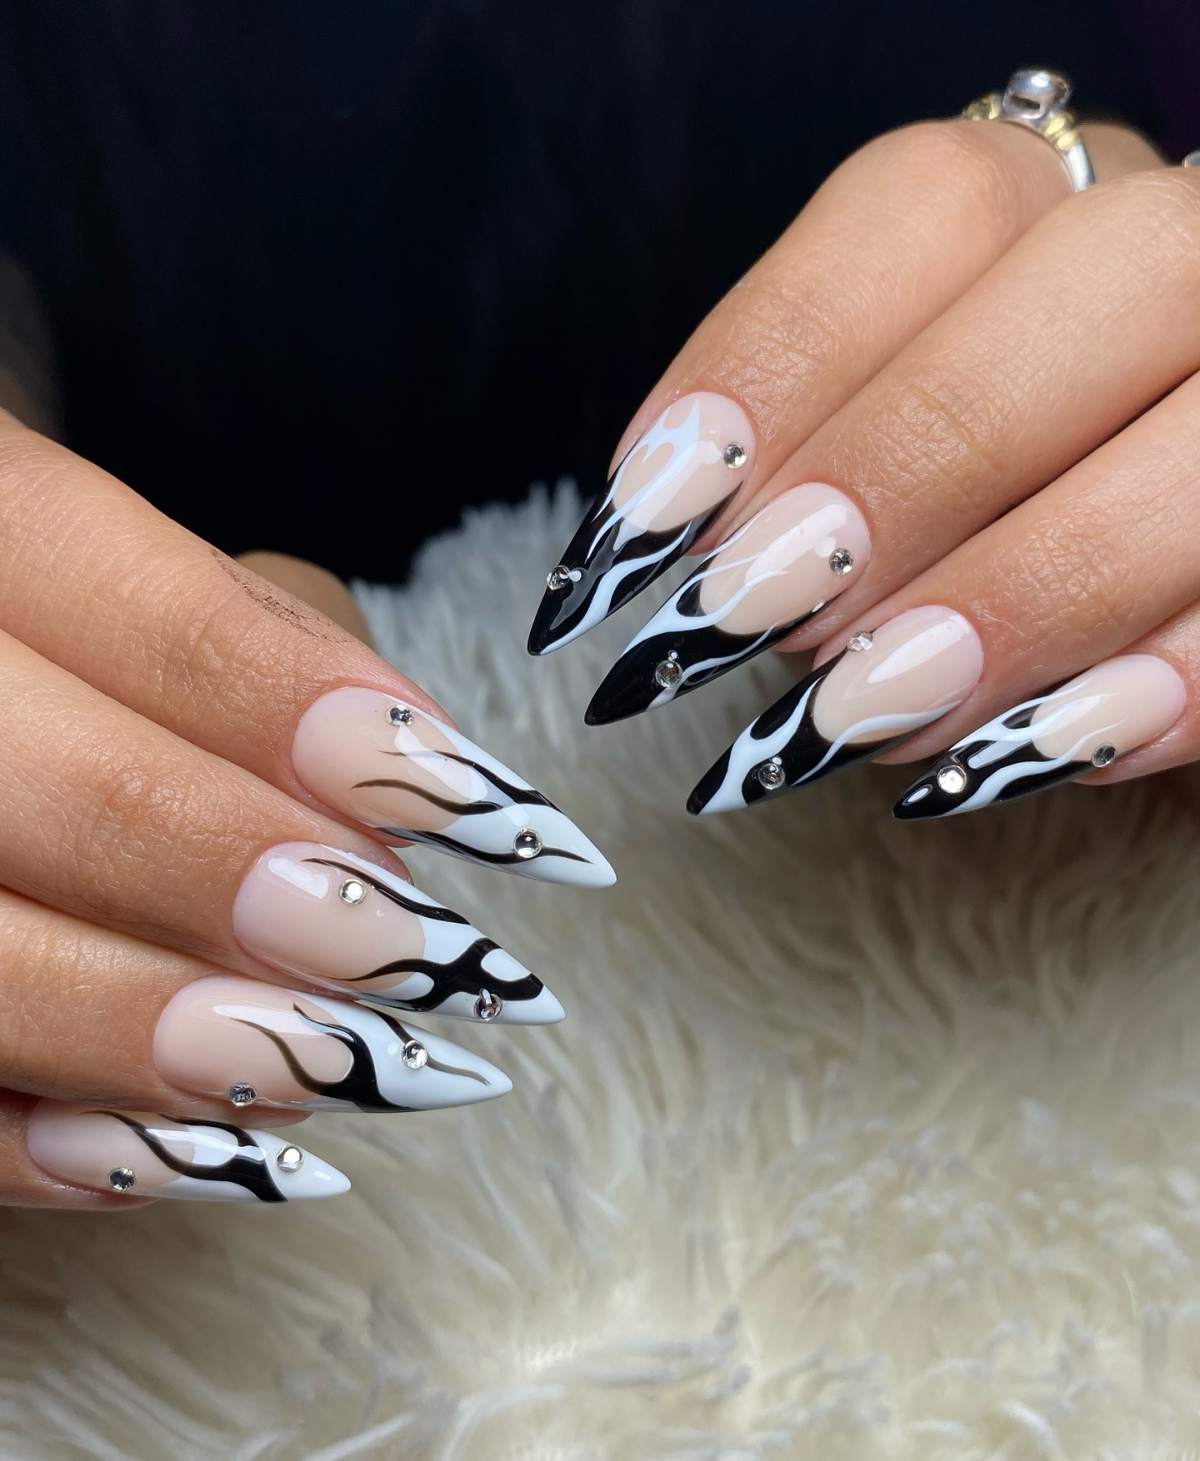 edgy black nail designs flame design in black and white